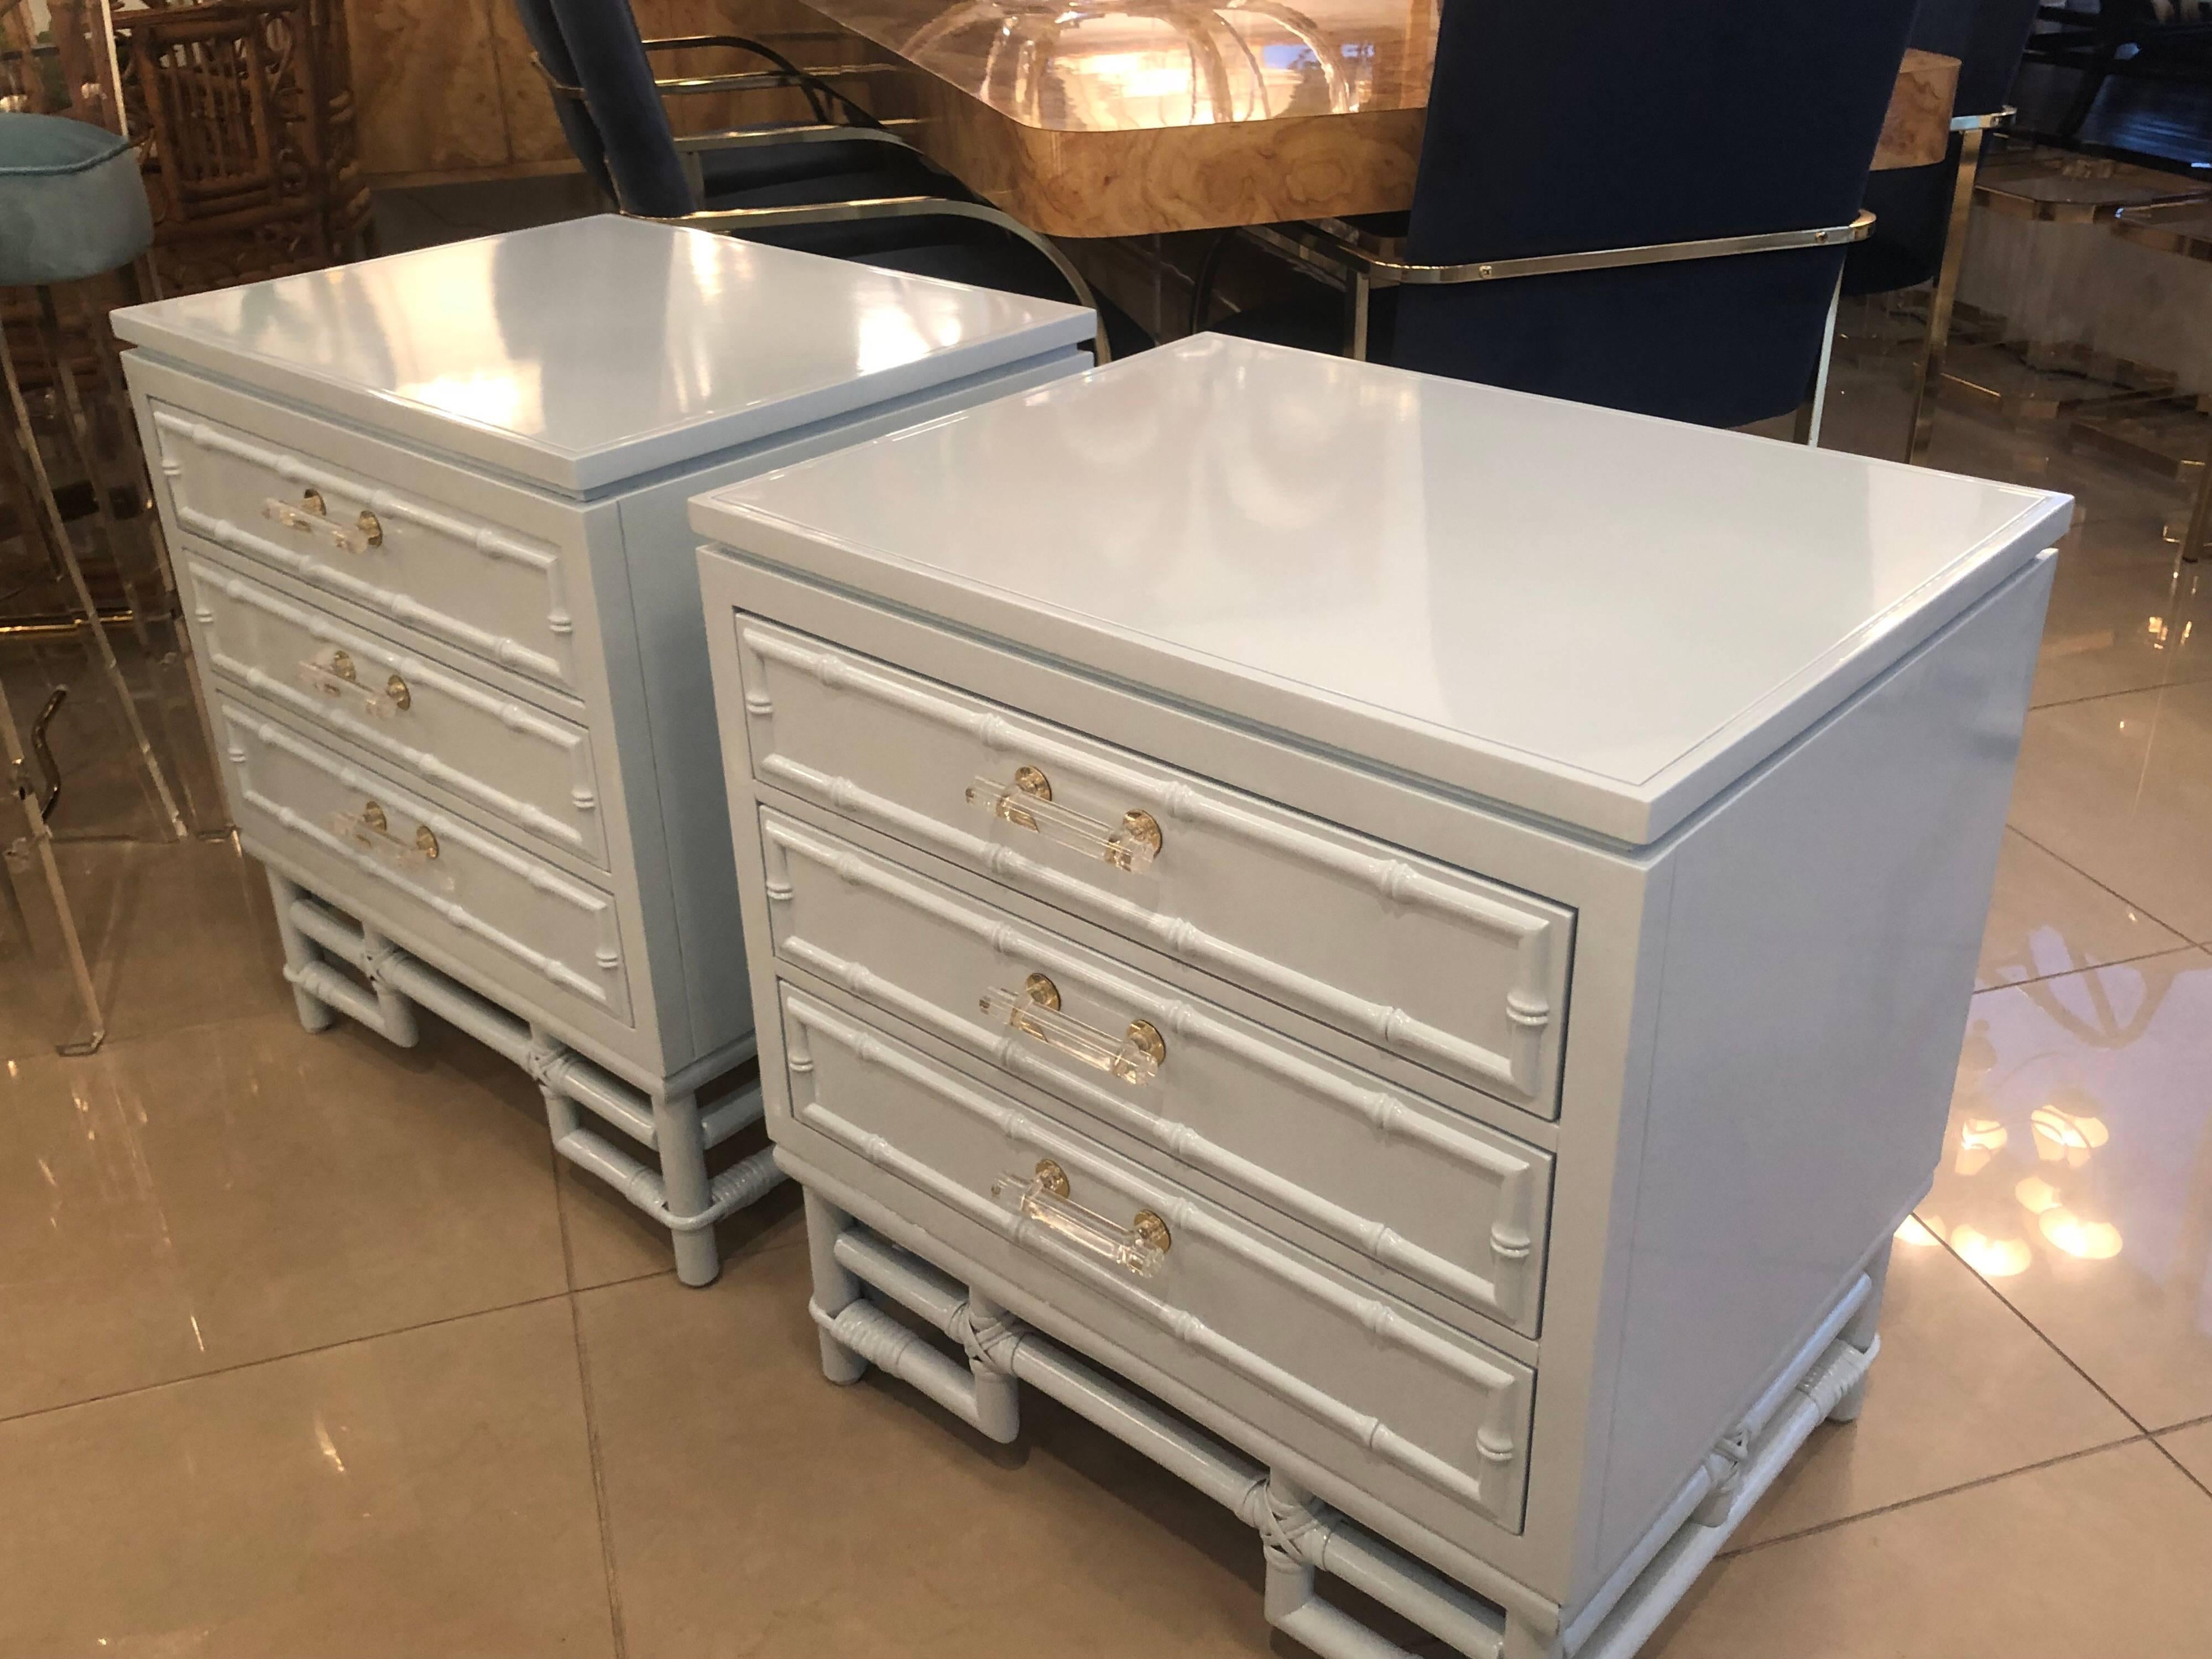 The most amazing pair of vintage faux bamboo nightstands nightstands. These have been professionally restored. Newly lacquered in the softest powder blue, including inside the drawers. Vintage custom Lucite and brass hardware has been added to put